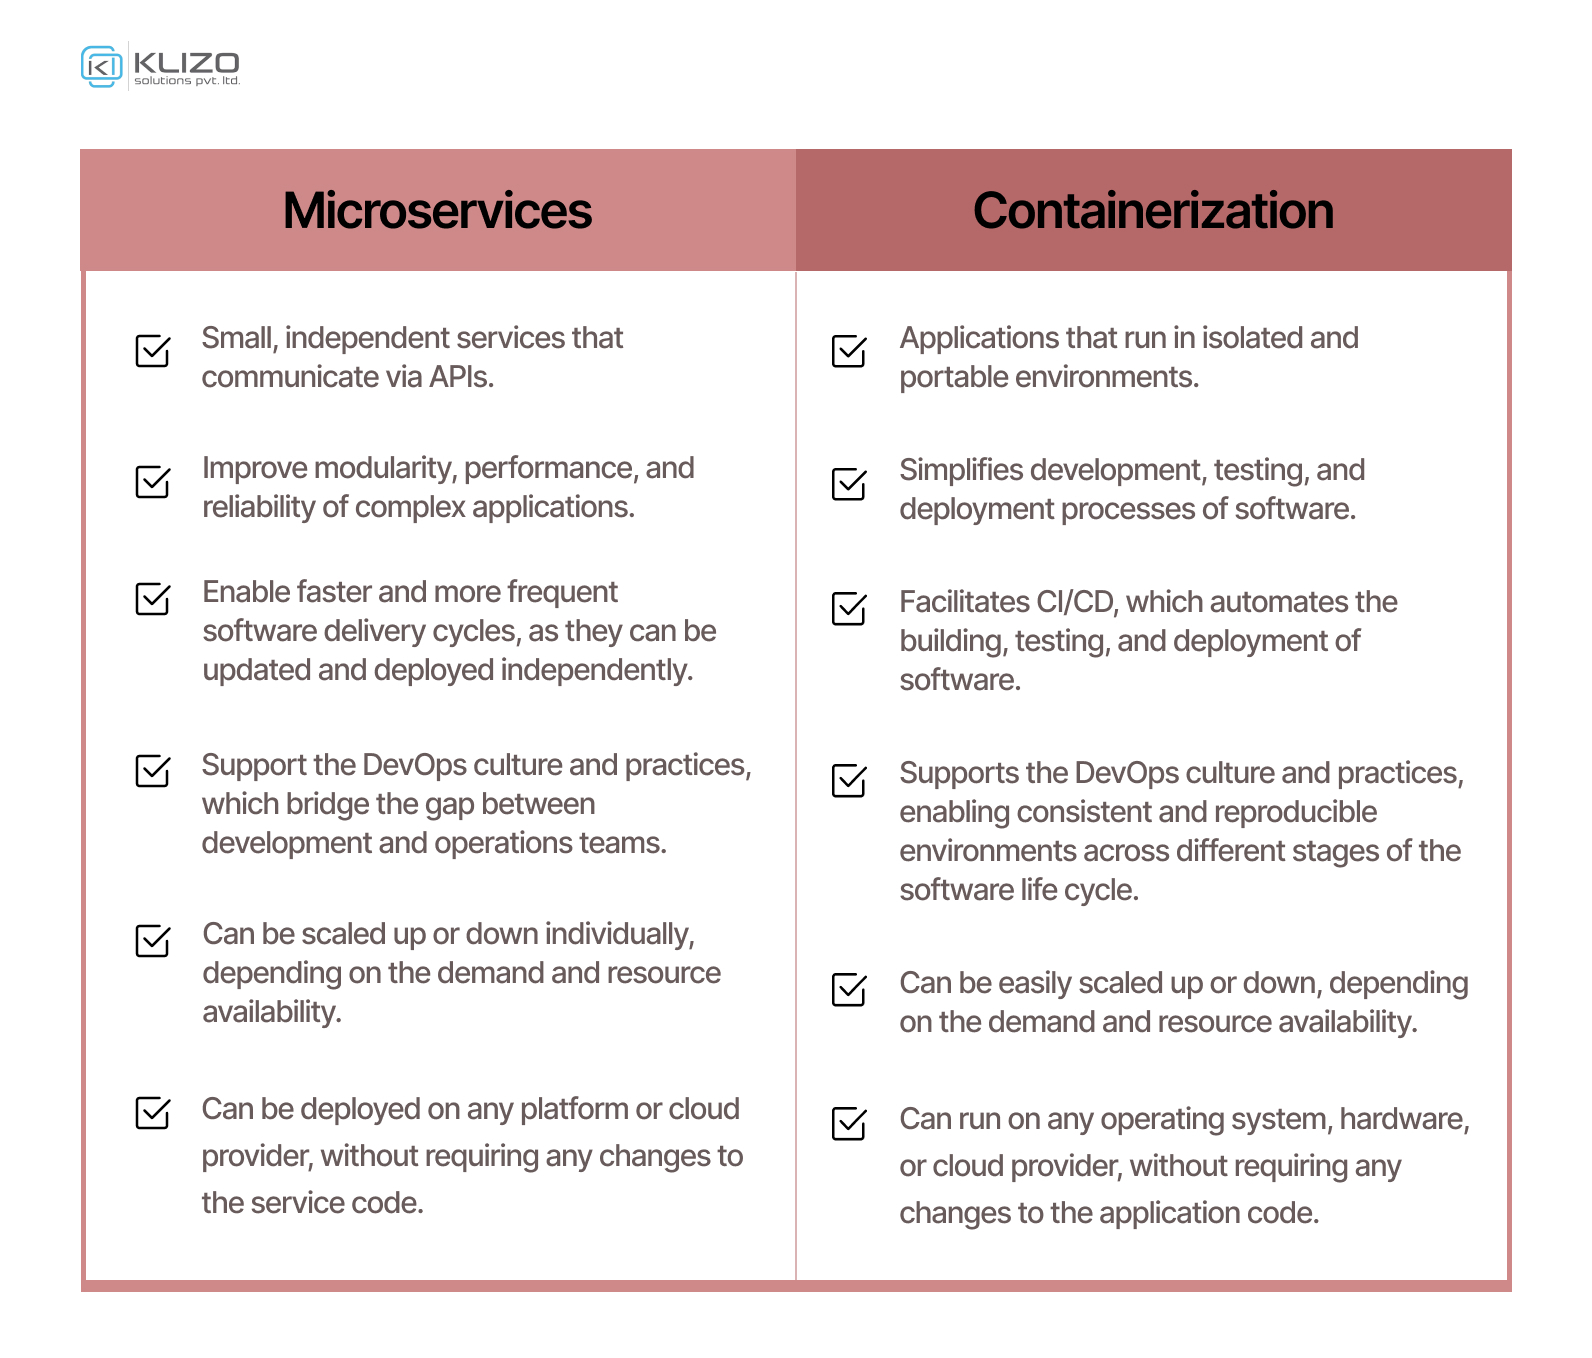 microservices and containerization